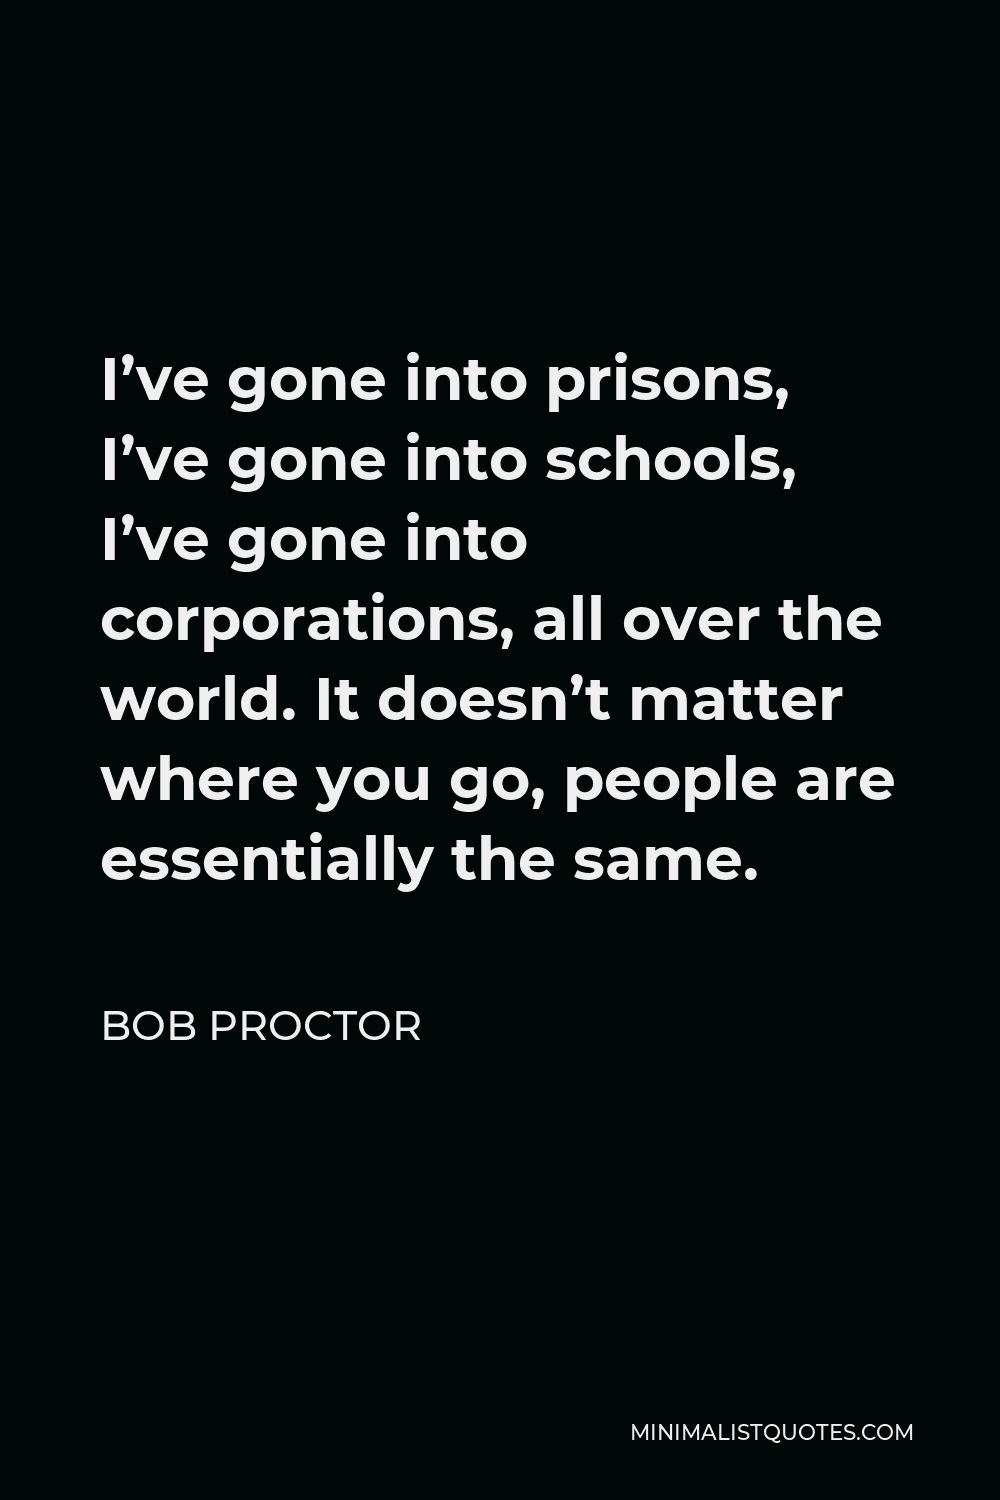 Bob Proctor Quote - I’ve gone into prisons, I’ve gone into schools, I’ve gone into corporations, all over the world. It doesn’t matter where you go, people are essentially the same.